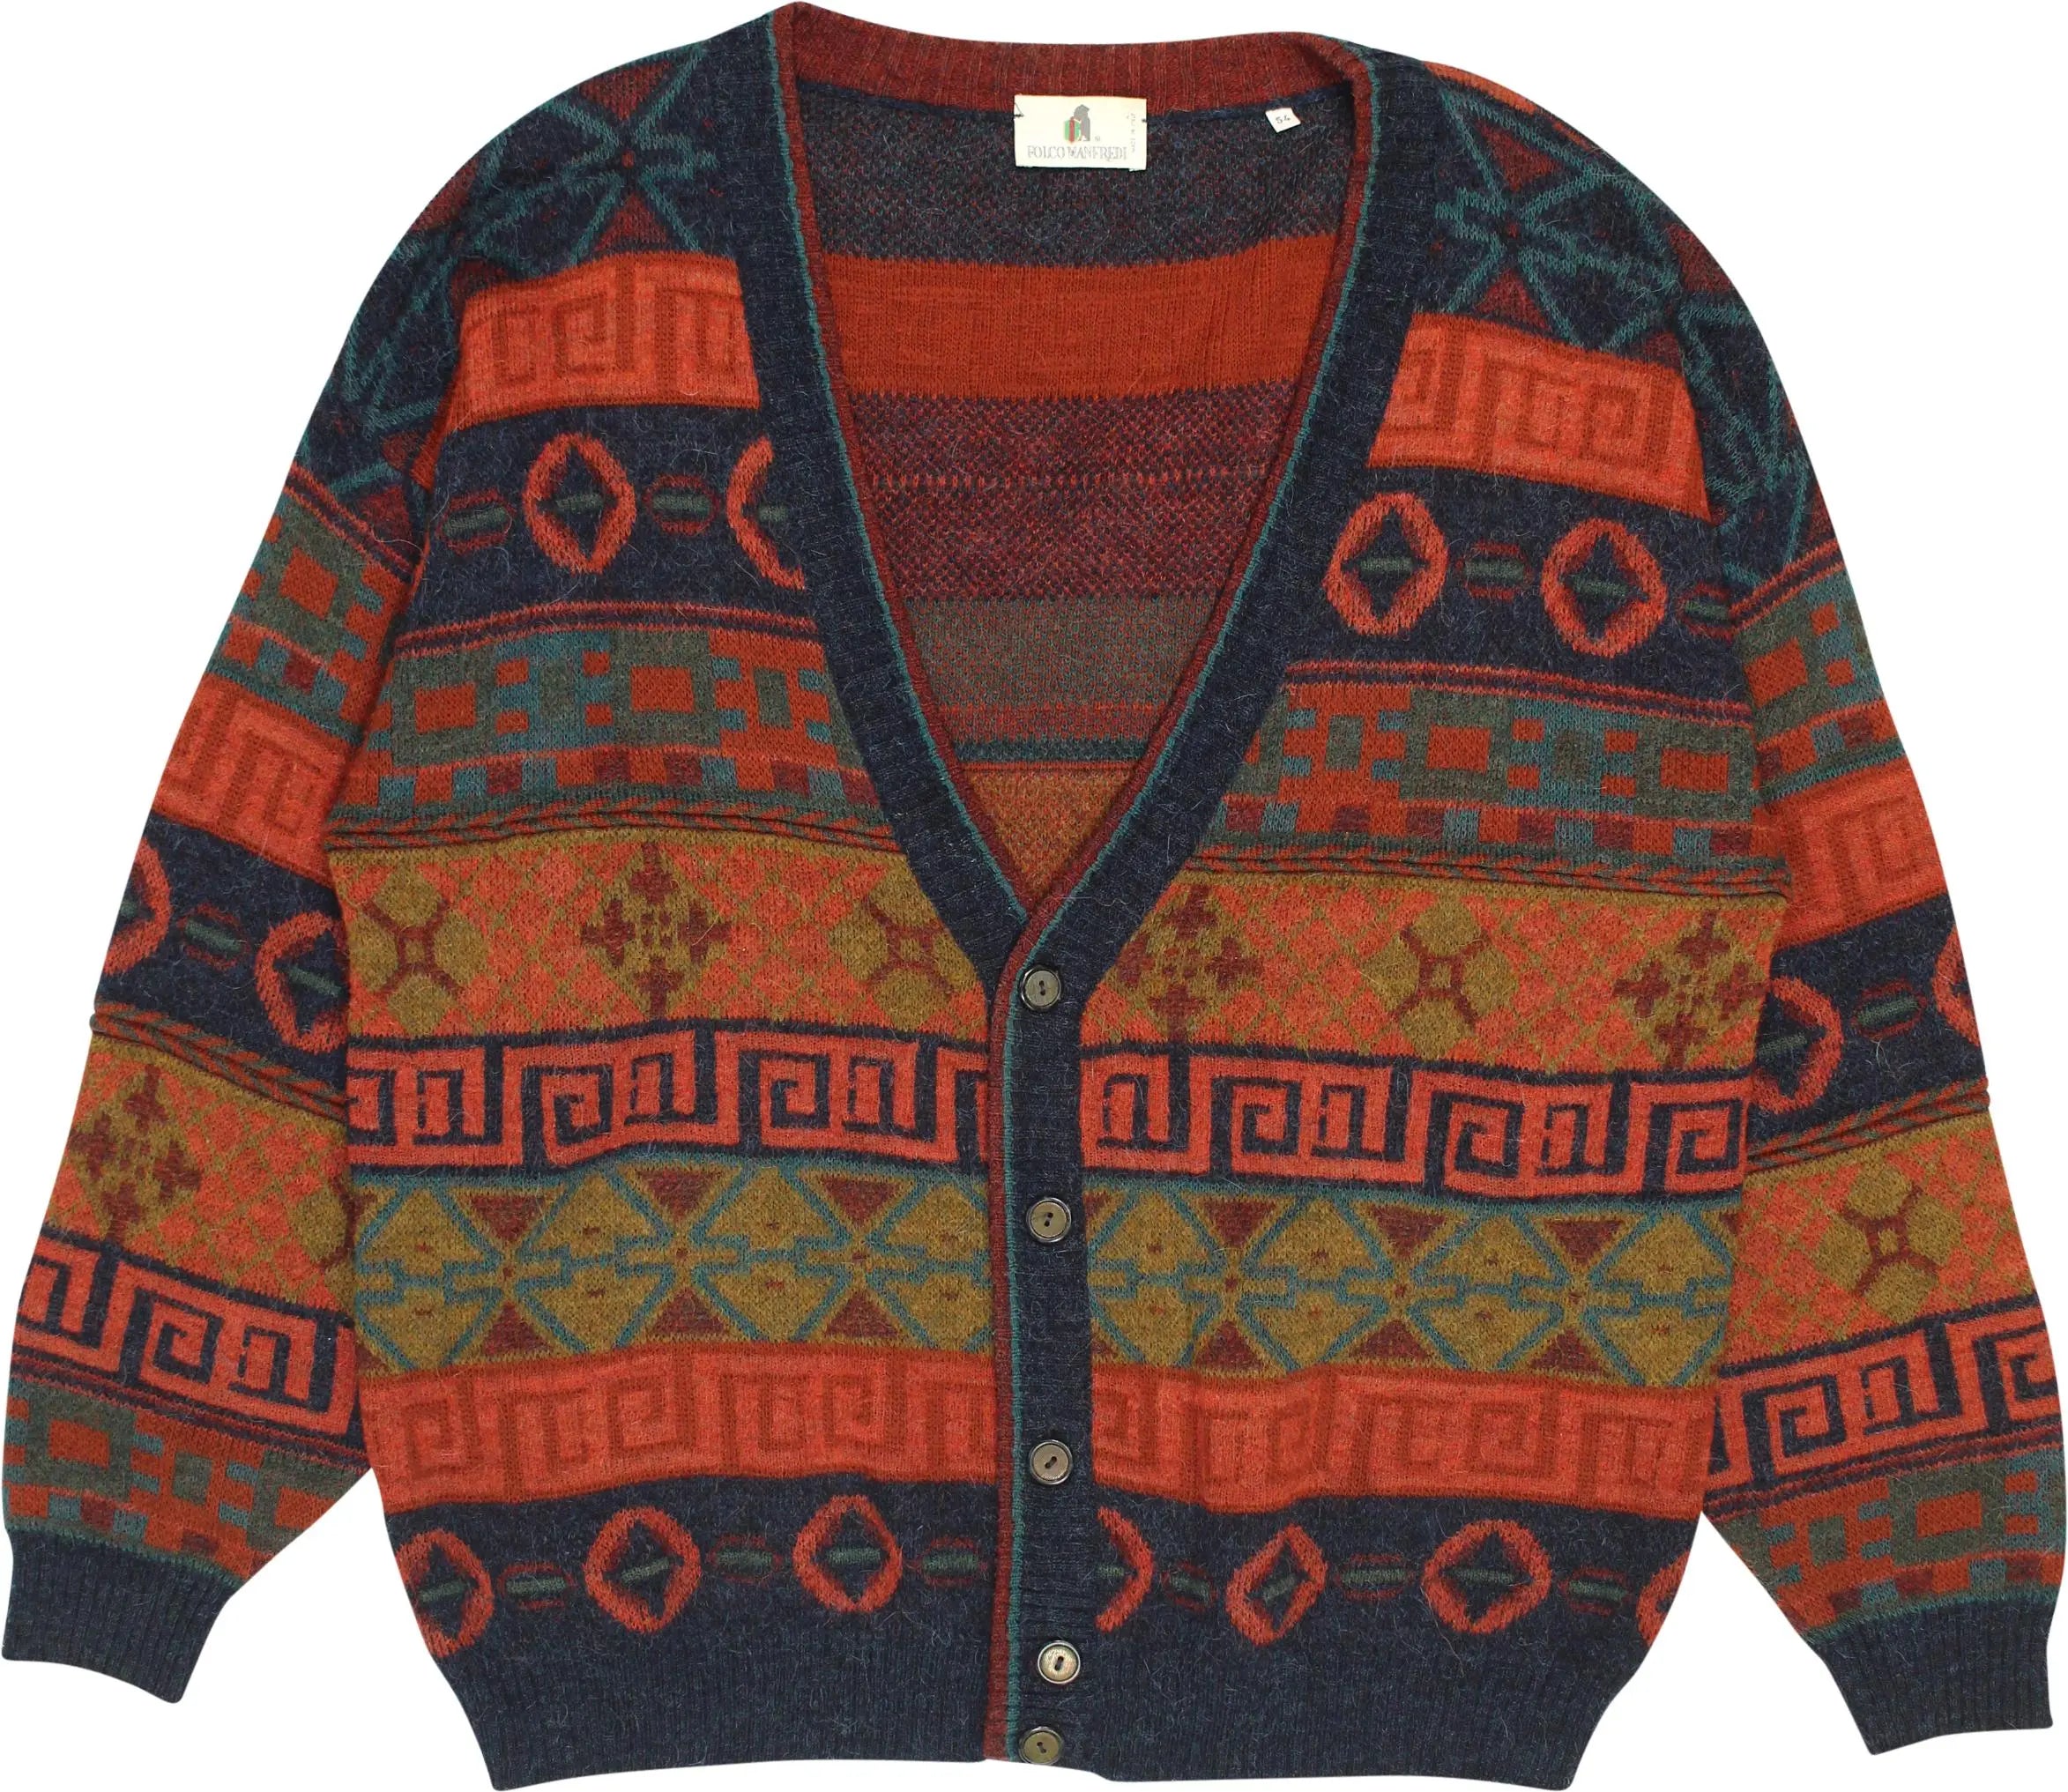 Folco Manfredi - 90s Wool Blend Cardigan- ThriftTale.com - Vintage and second handclothing